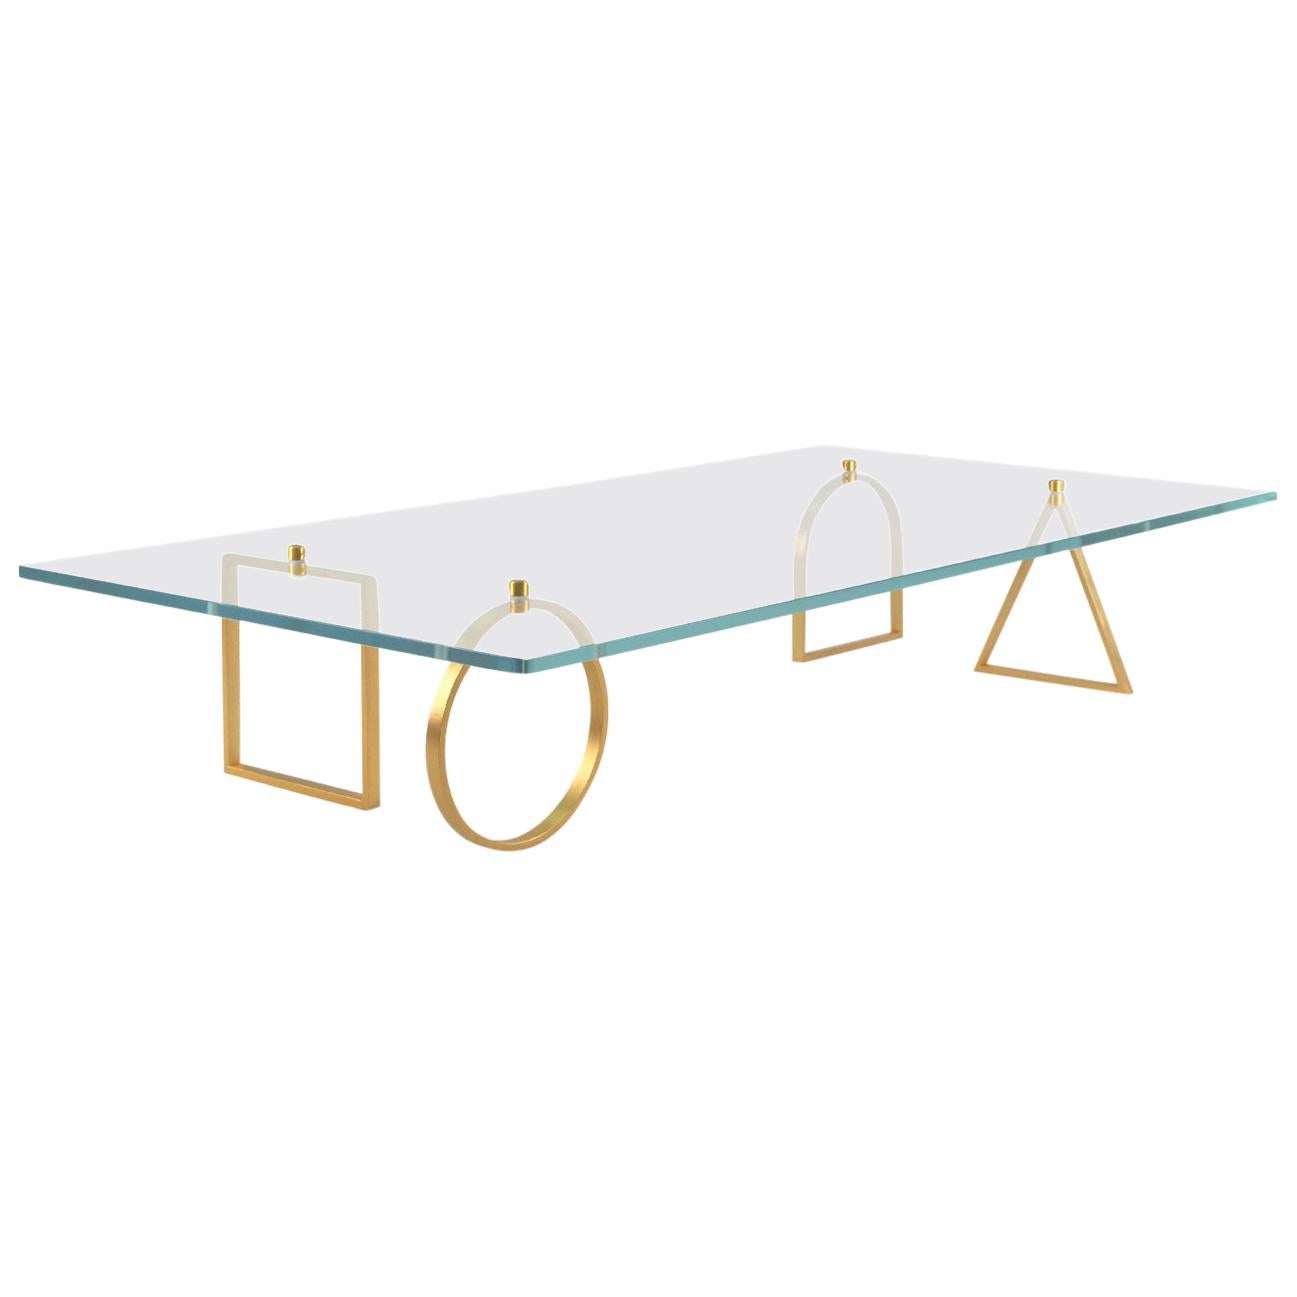 21st Century Bagatto Brass and Glass Contemporary Coffee Table by Ilaria Bianchi For Sale